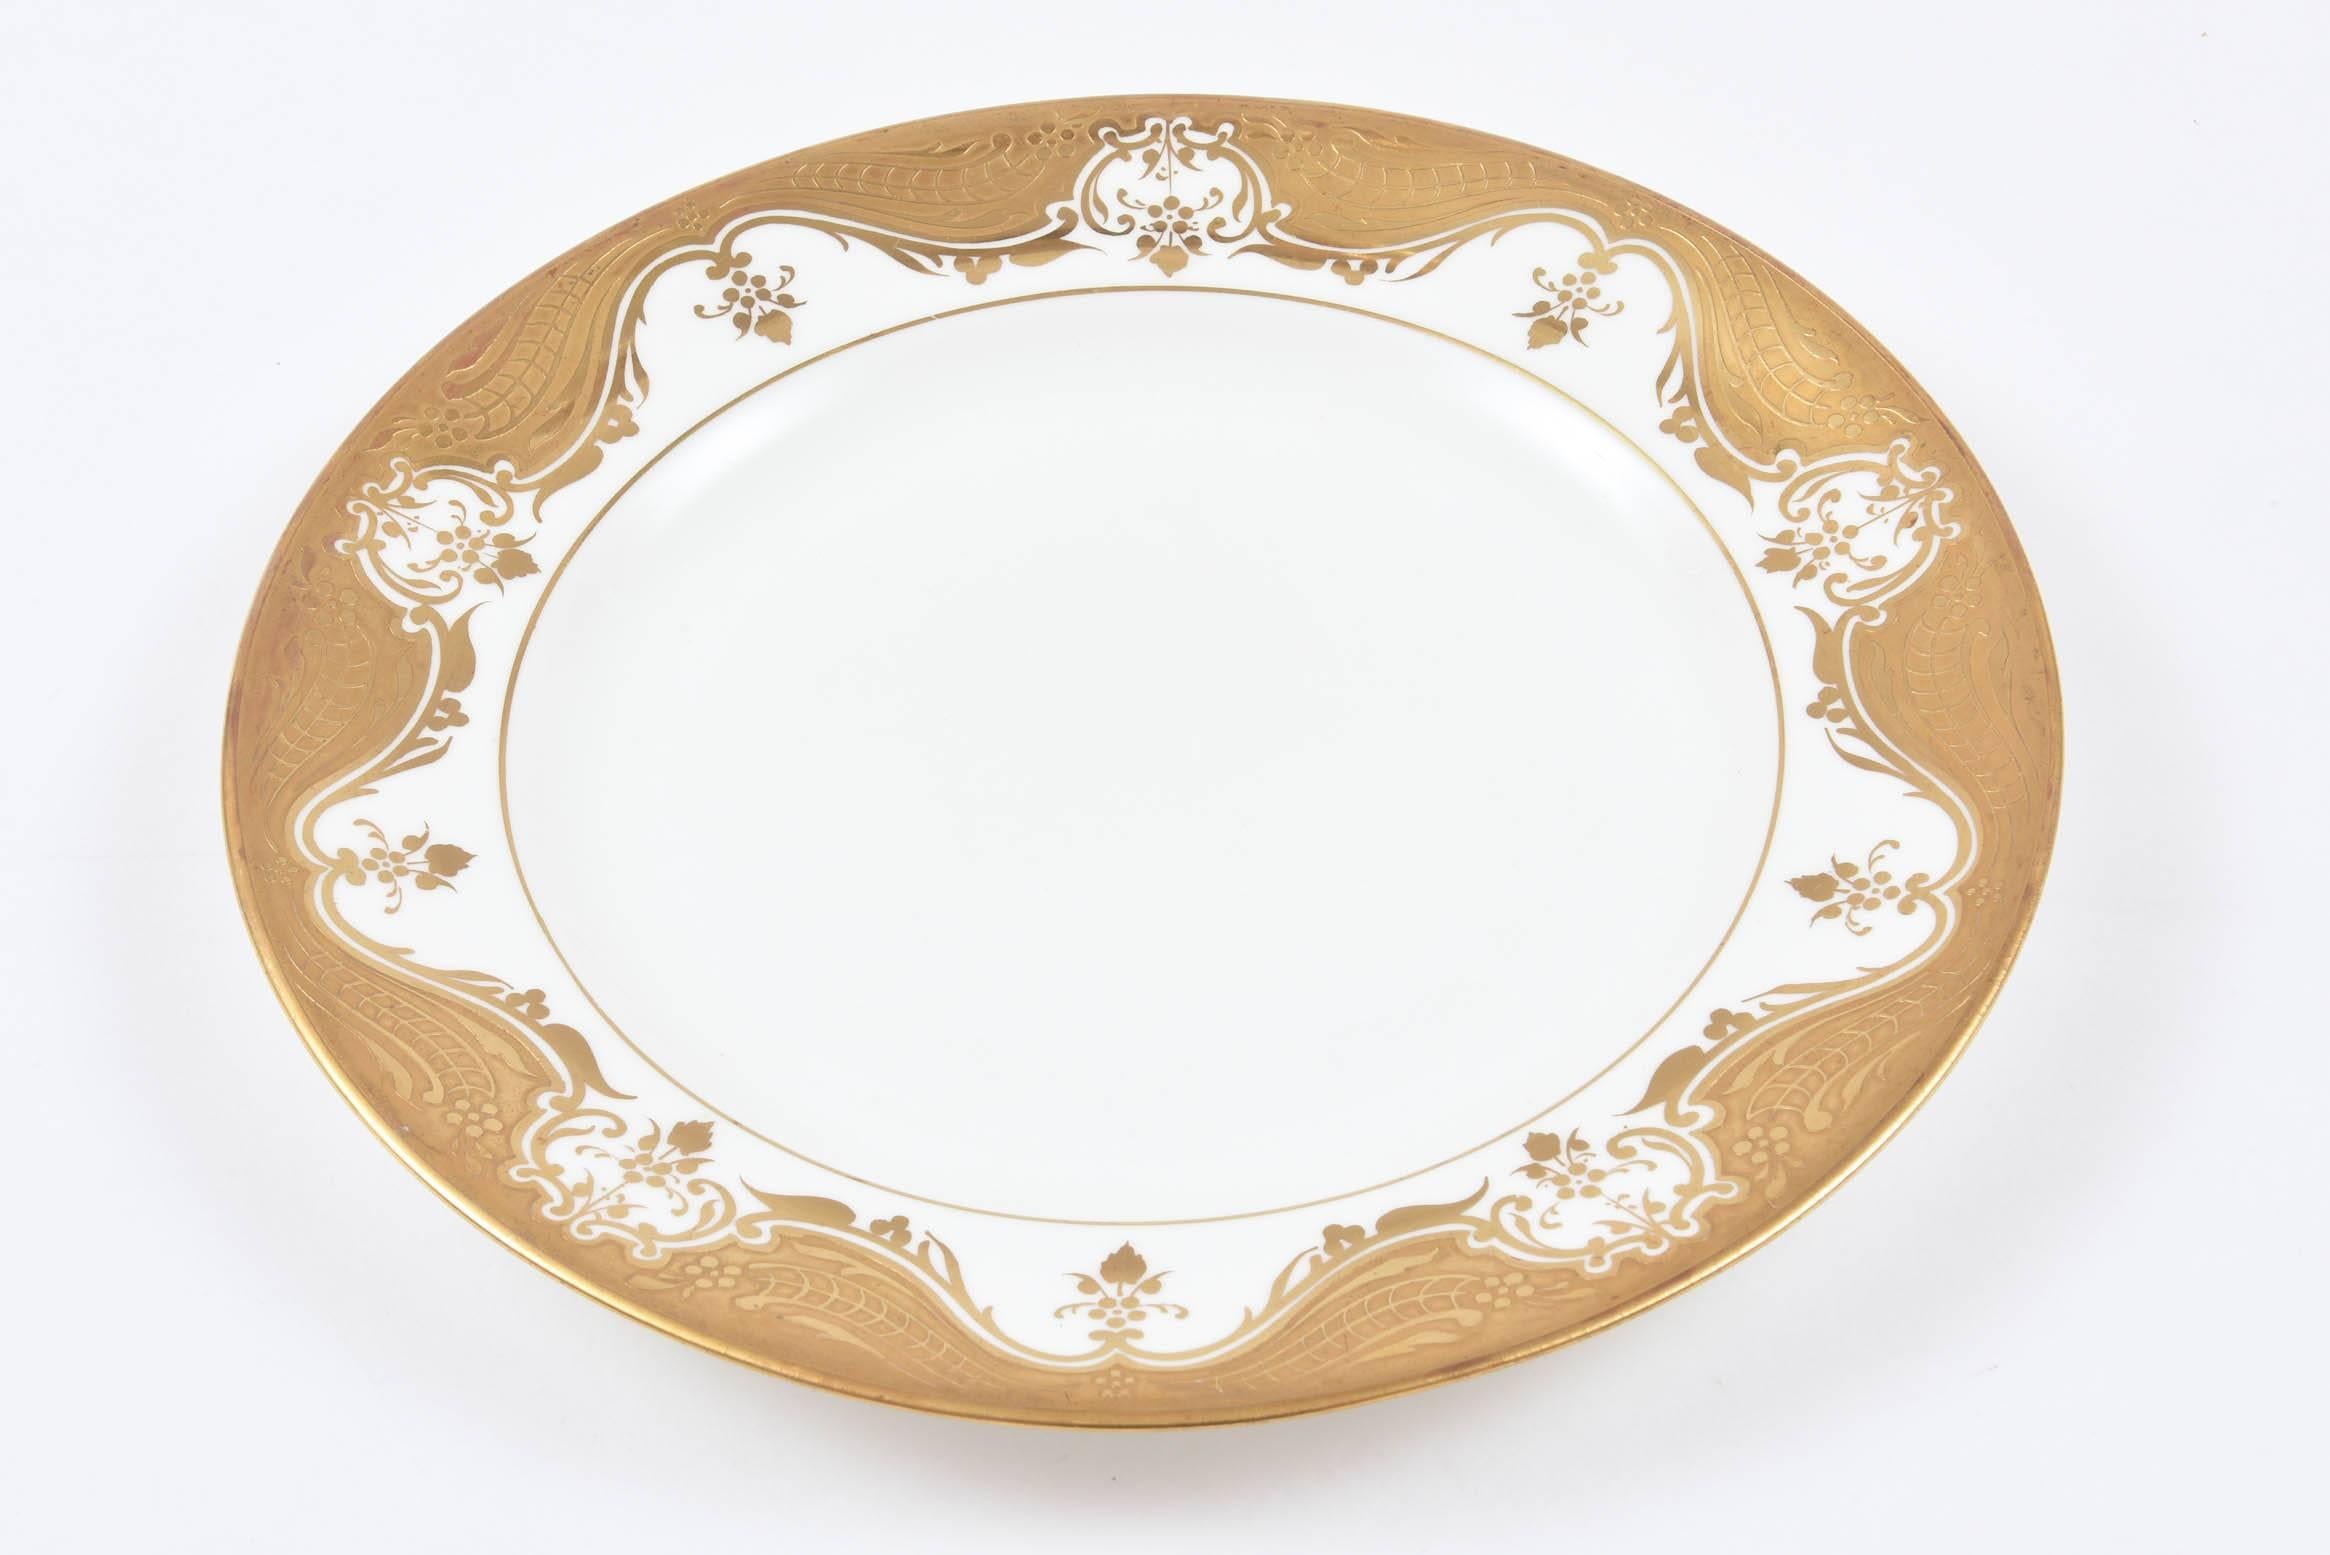 An unique and lovely set of 12 white and classic gold etch band plates measuring just under 10.0